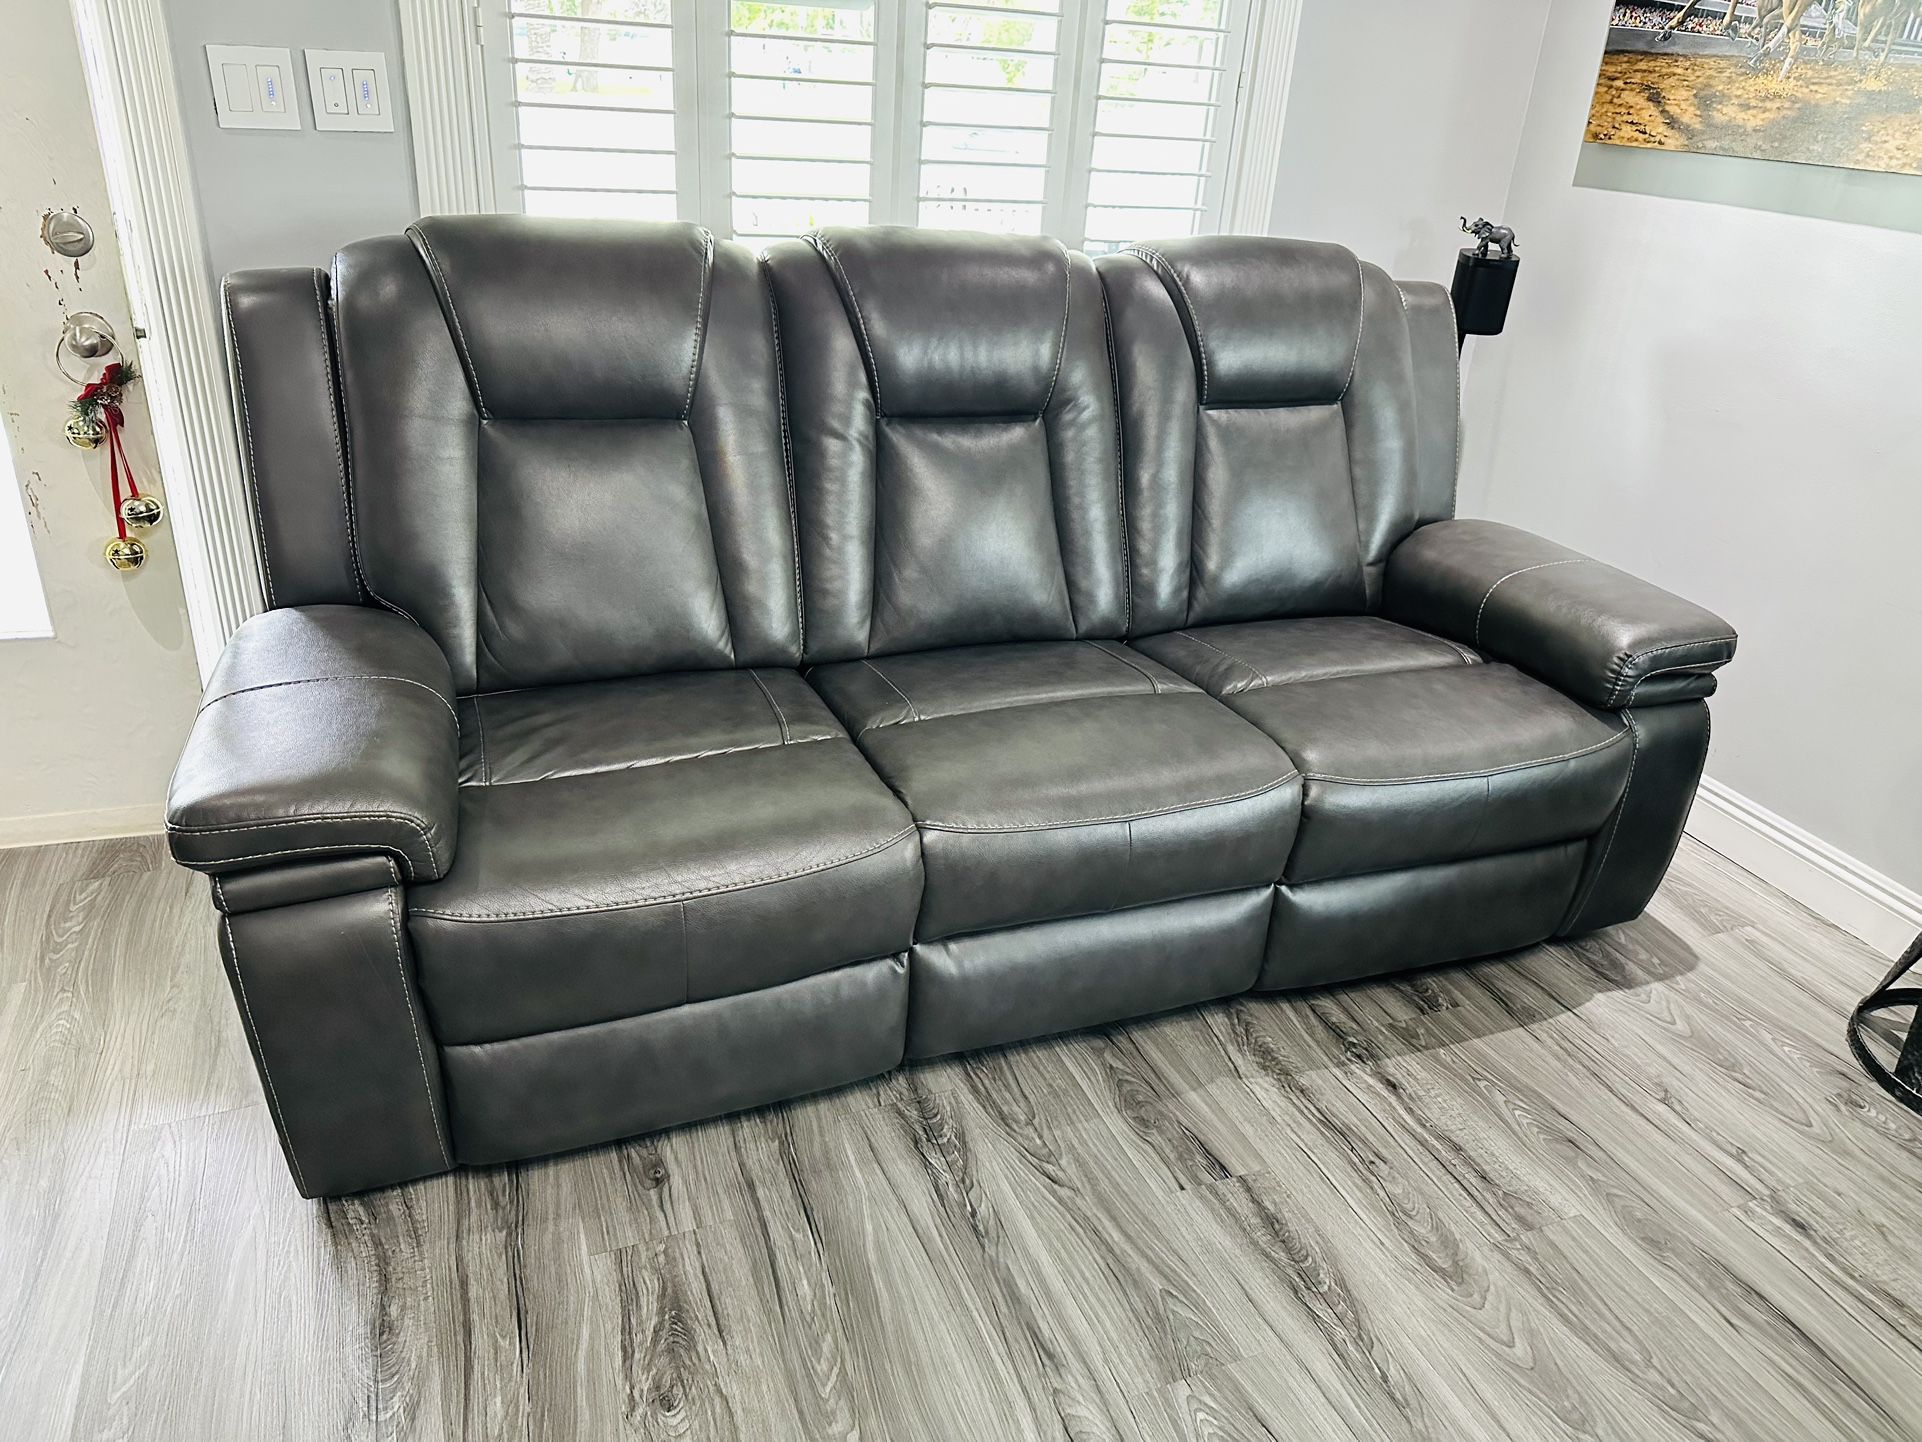 Leather Sofas With Recliners Brand New Set Of Two